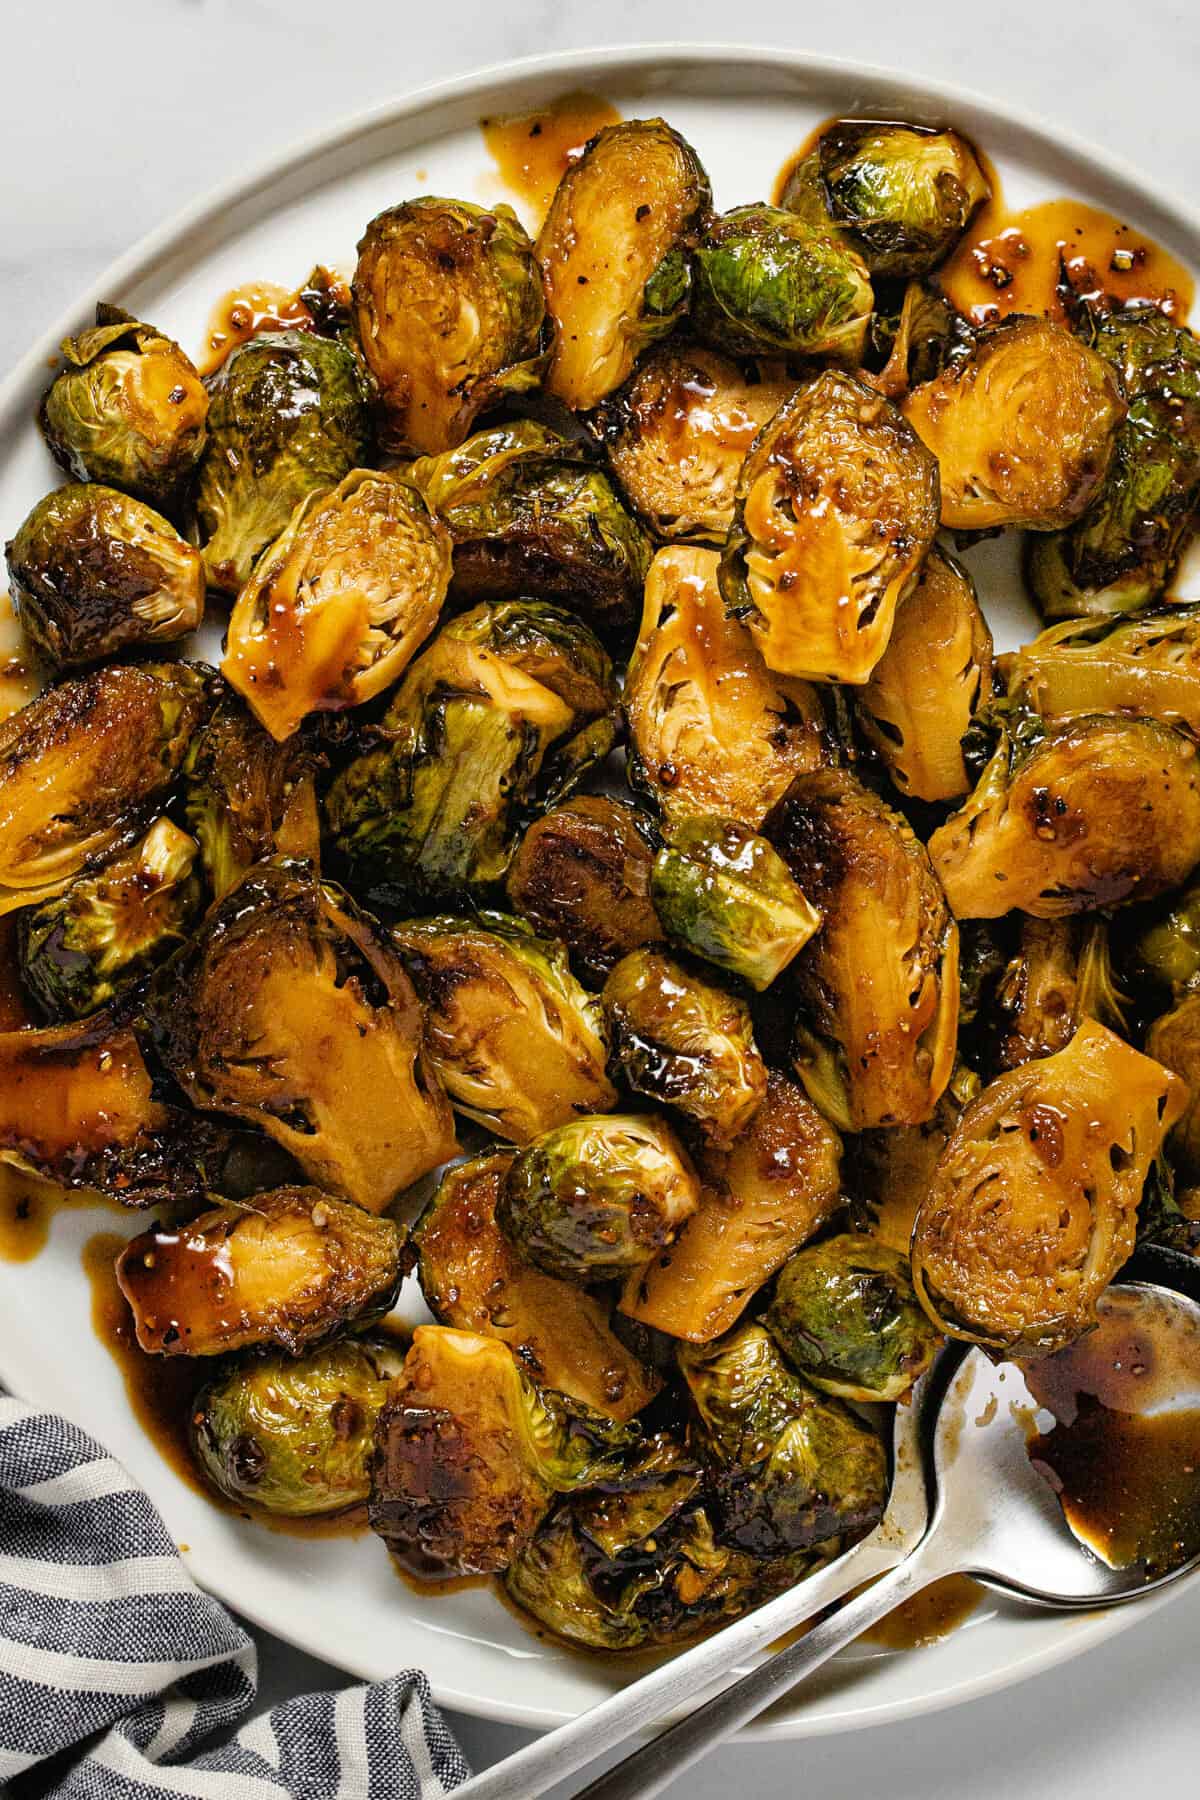 Overhead shot of balsamic glazed Brussel sprouts on a white plate